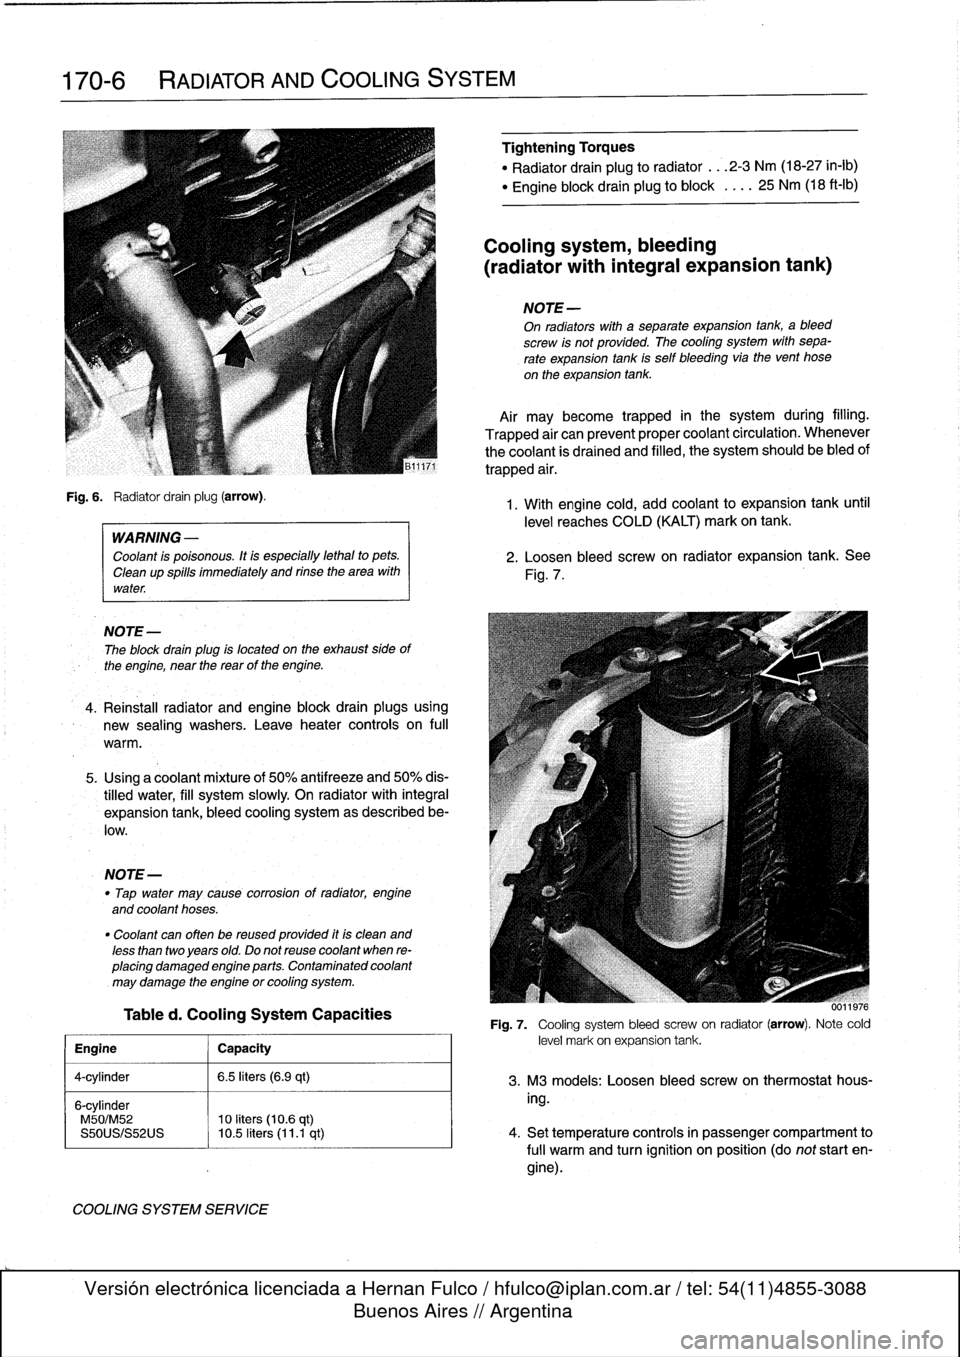 BMW 323i 1995 E36 Repair Manual 
170-6

	

RADIATOR
AND
COOLING
SYSTEM

Fig
.
6
.

	

Radiator
drain
plug
(arrow)
.

WARNING
-

Coolant
is
poisonous
.
Itis
especially
lethal
to
pets
.

Cleanup
spills
immediately
and
rinse
the
area
w